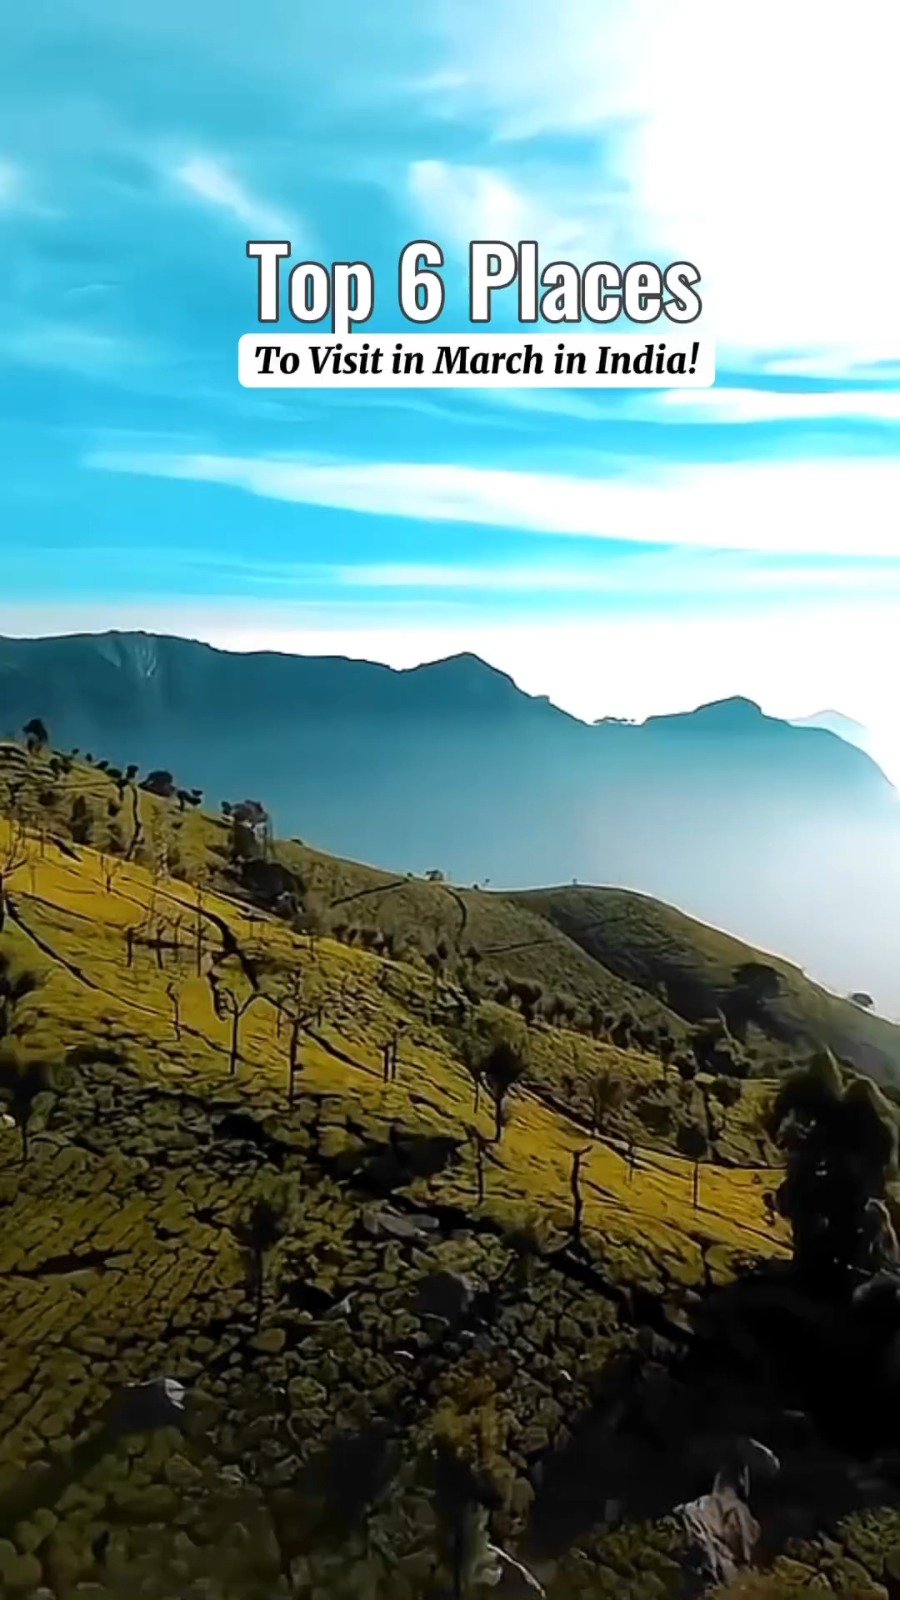 📍Top 6 places to visit in March in India!